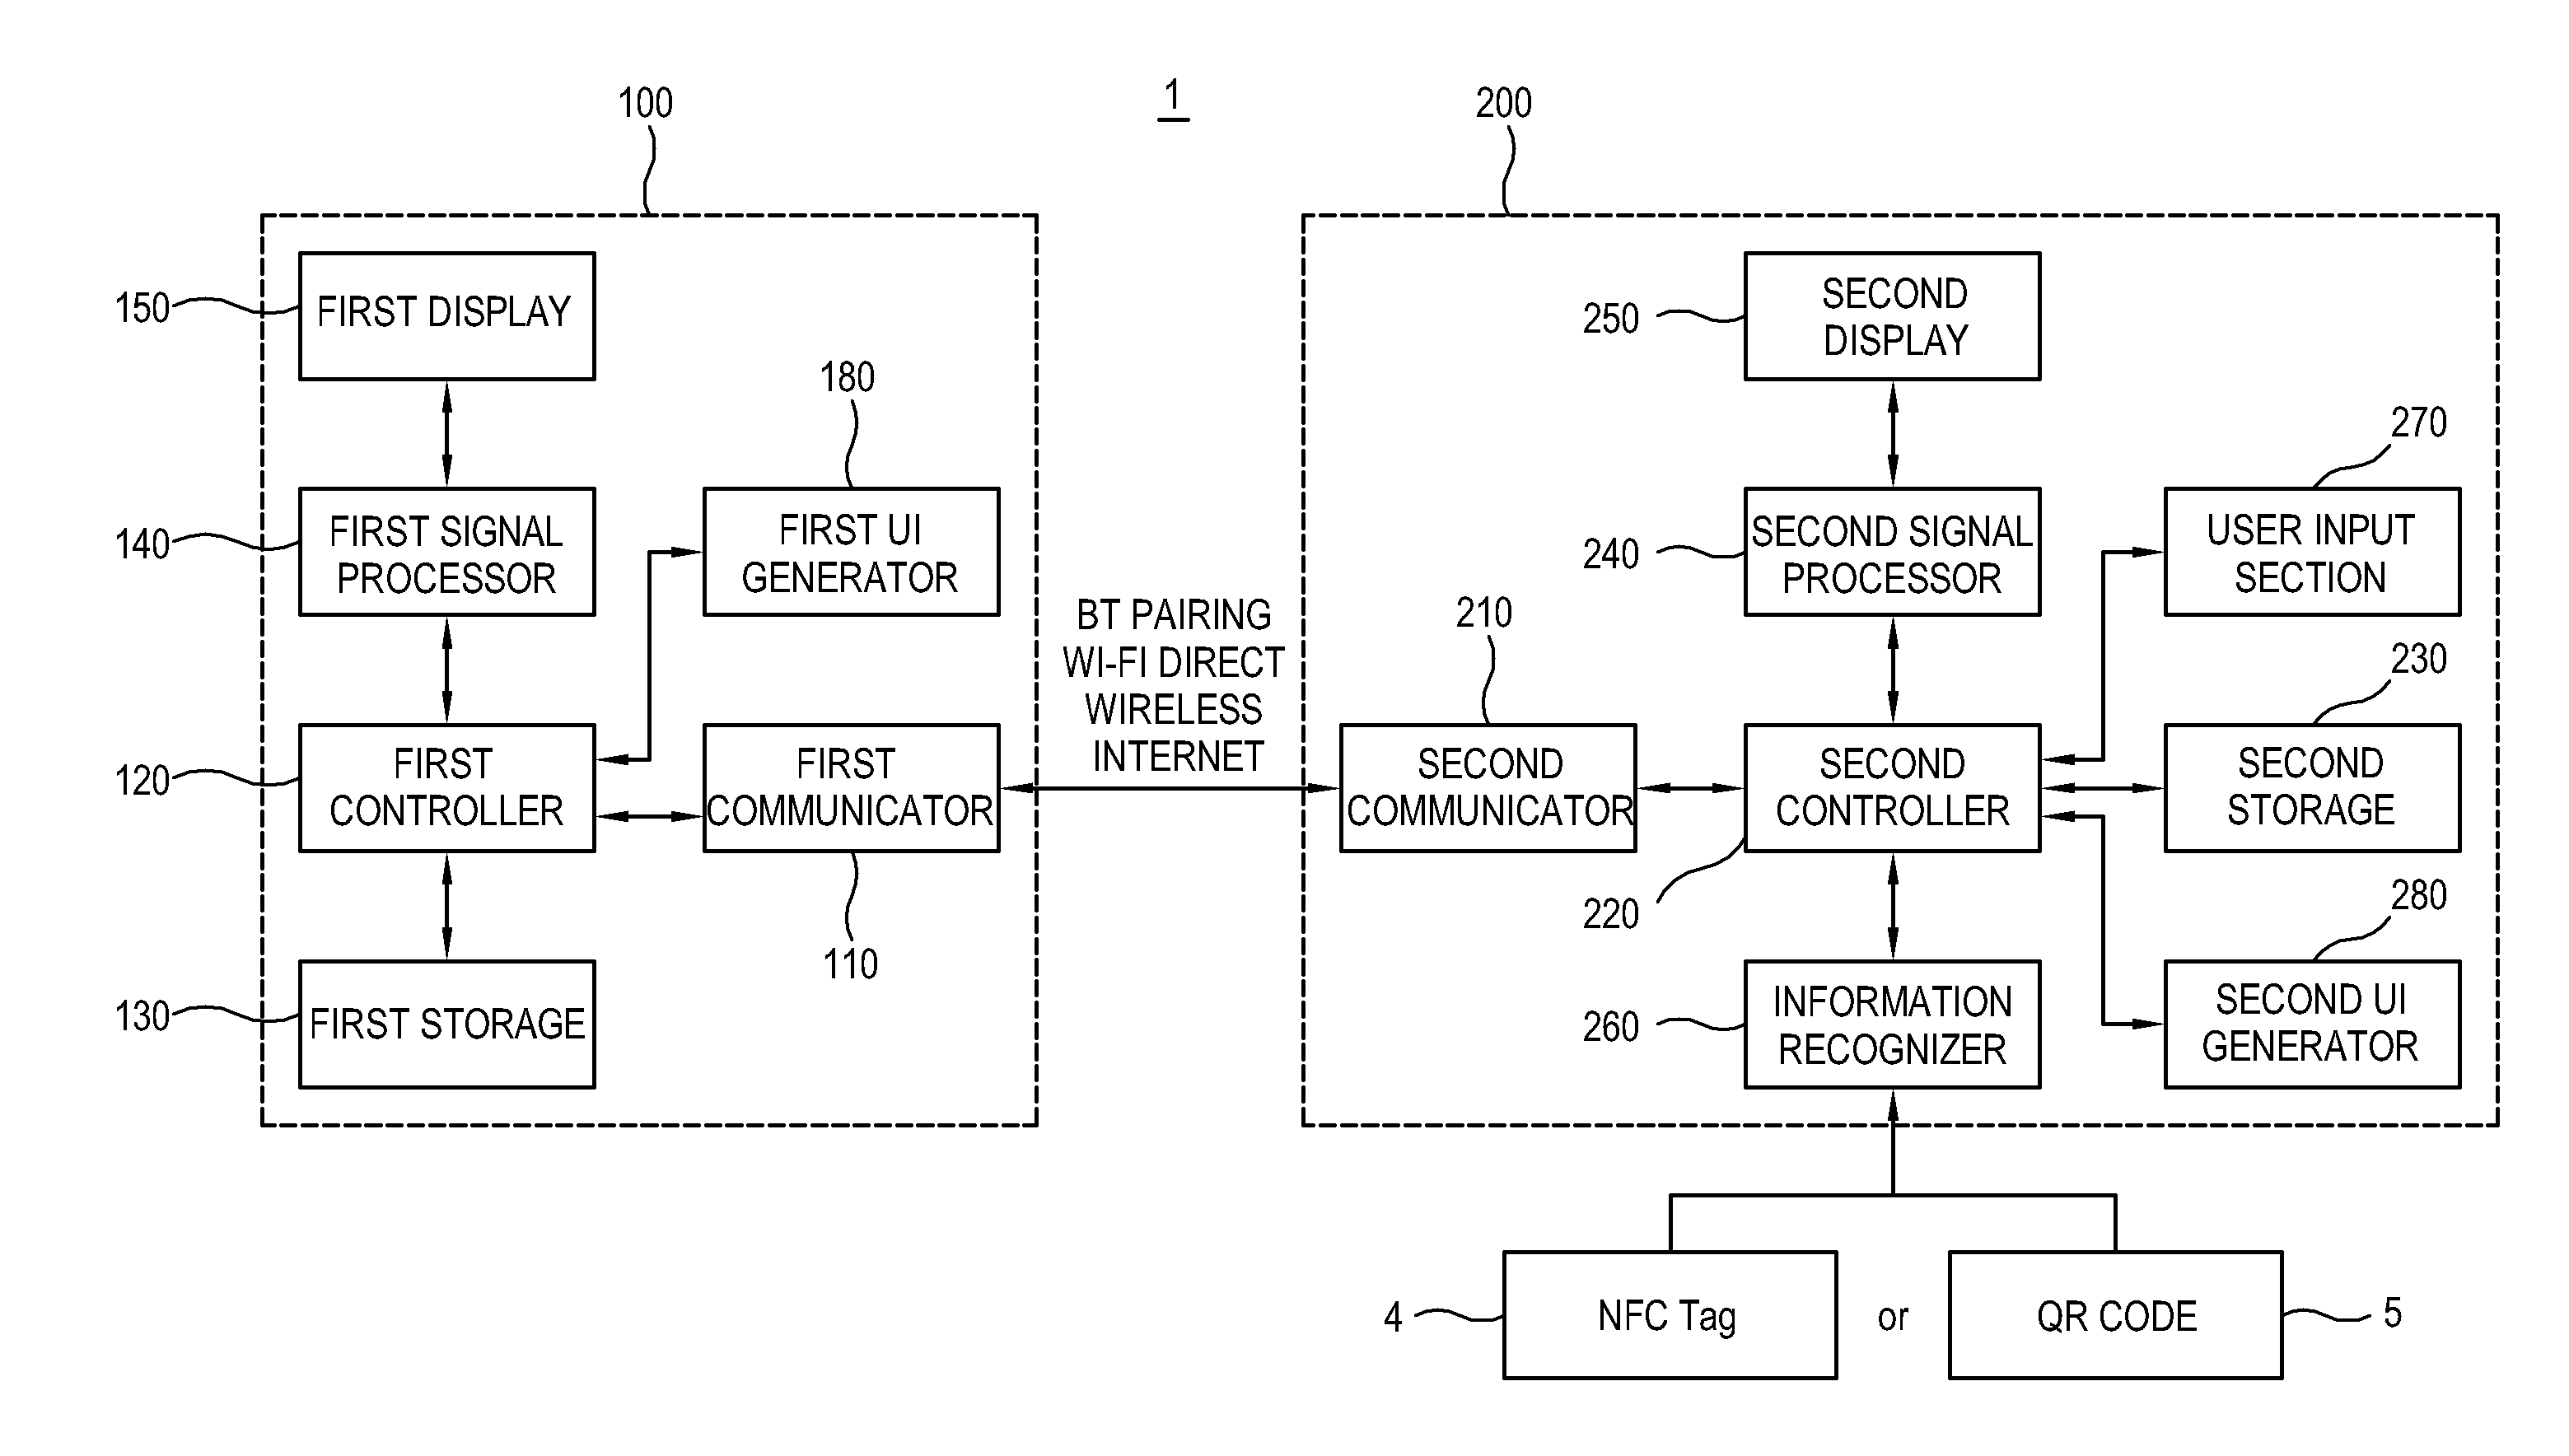 Display apparatus, and method and apparatus for setting up and controlling the same